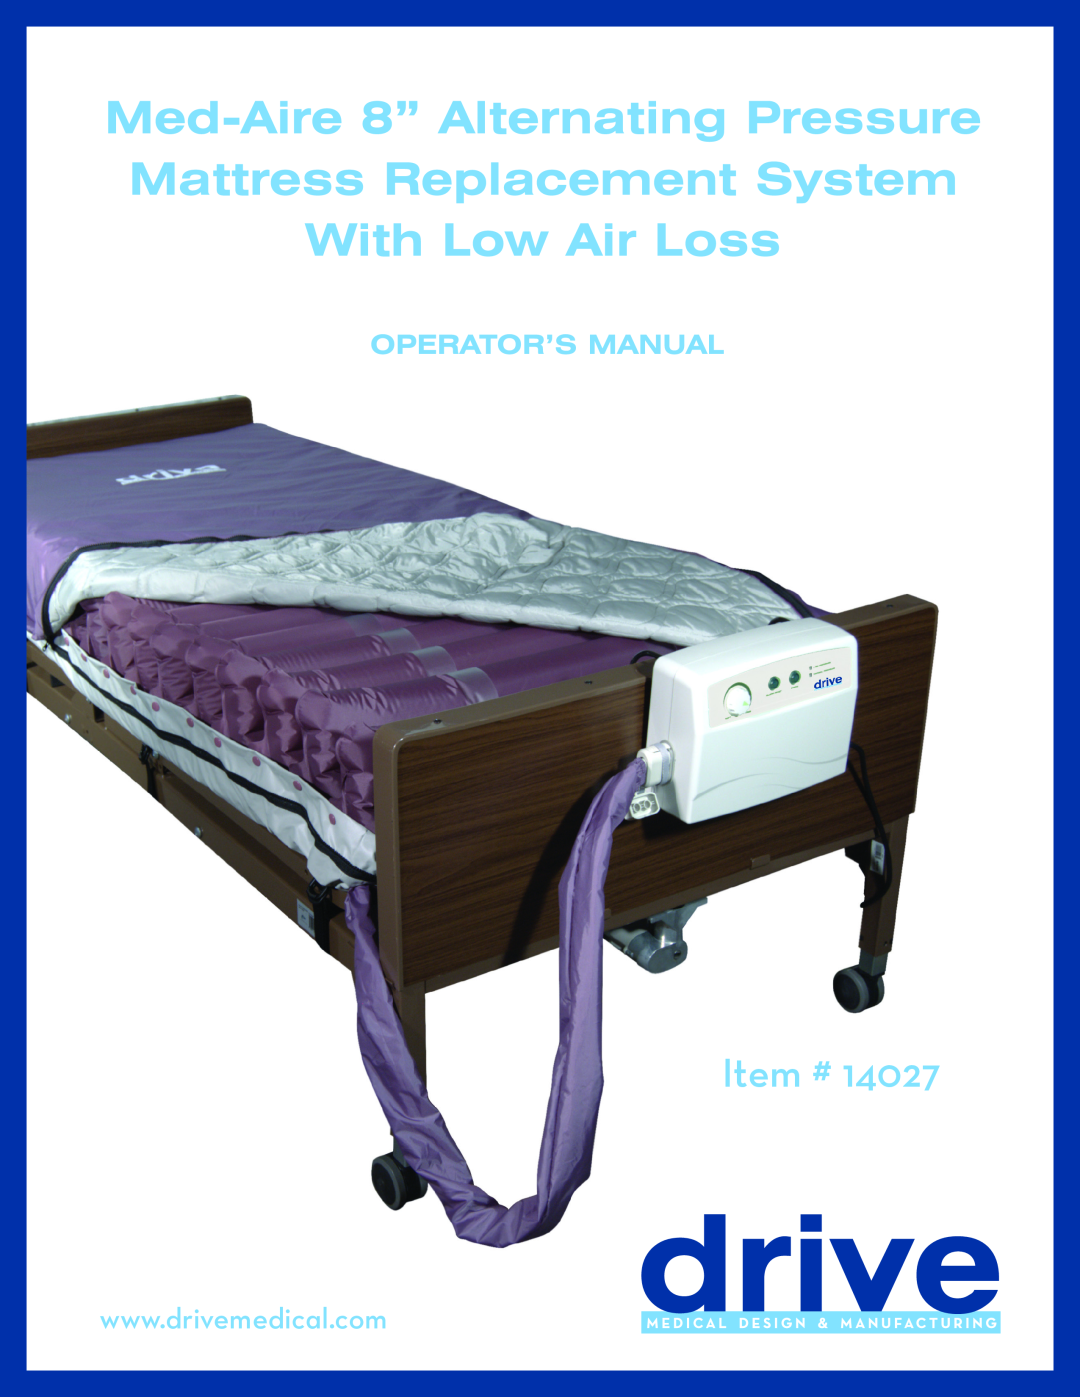 Drive Medical Design 14027 manual Med-Aire 8” Alternating Pressure Mattress Replacement System, With Low Air Loss, Item # 